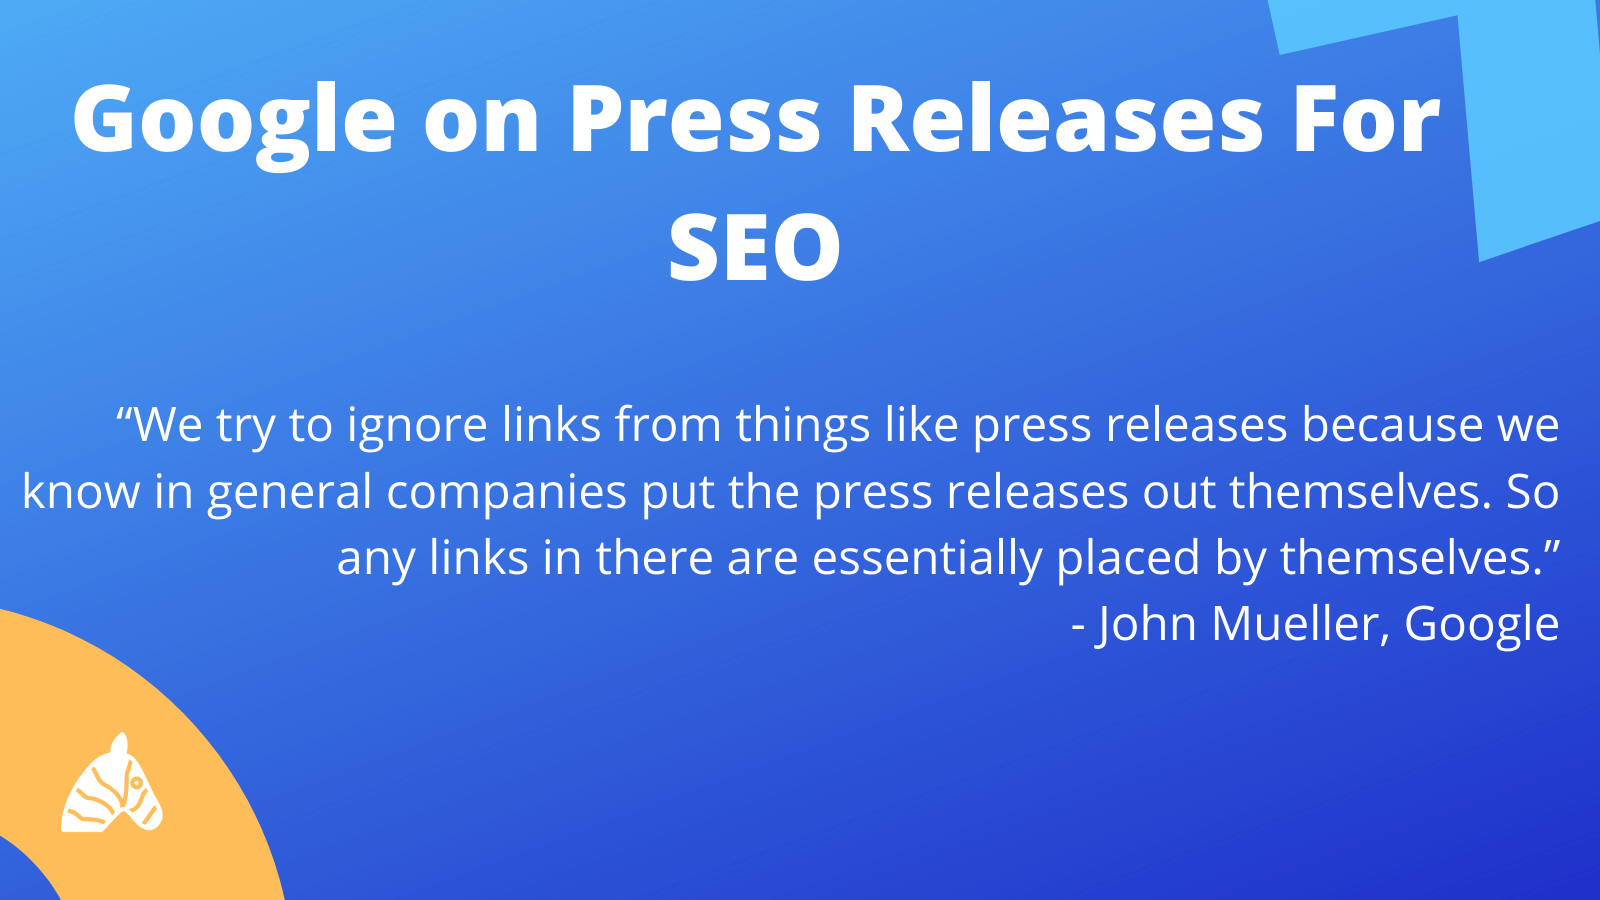 Google's stance on press releases for SEO